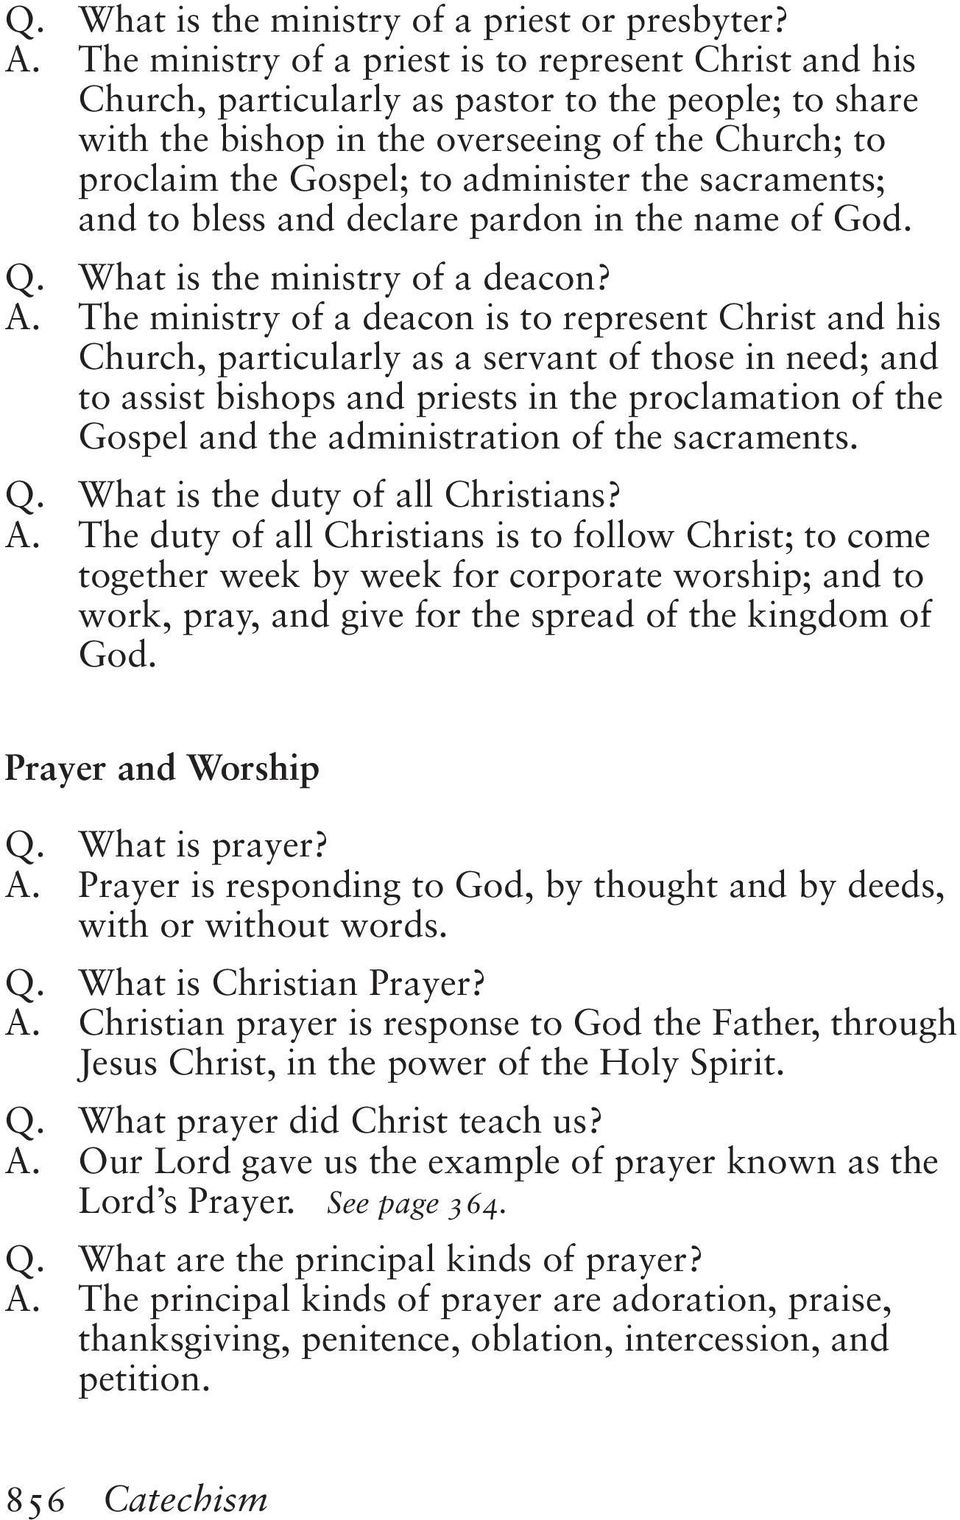 the sacraments; and to bless and declare pardon in the name of God. Q. What is the ministry of a deacon? A.